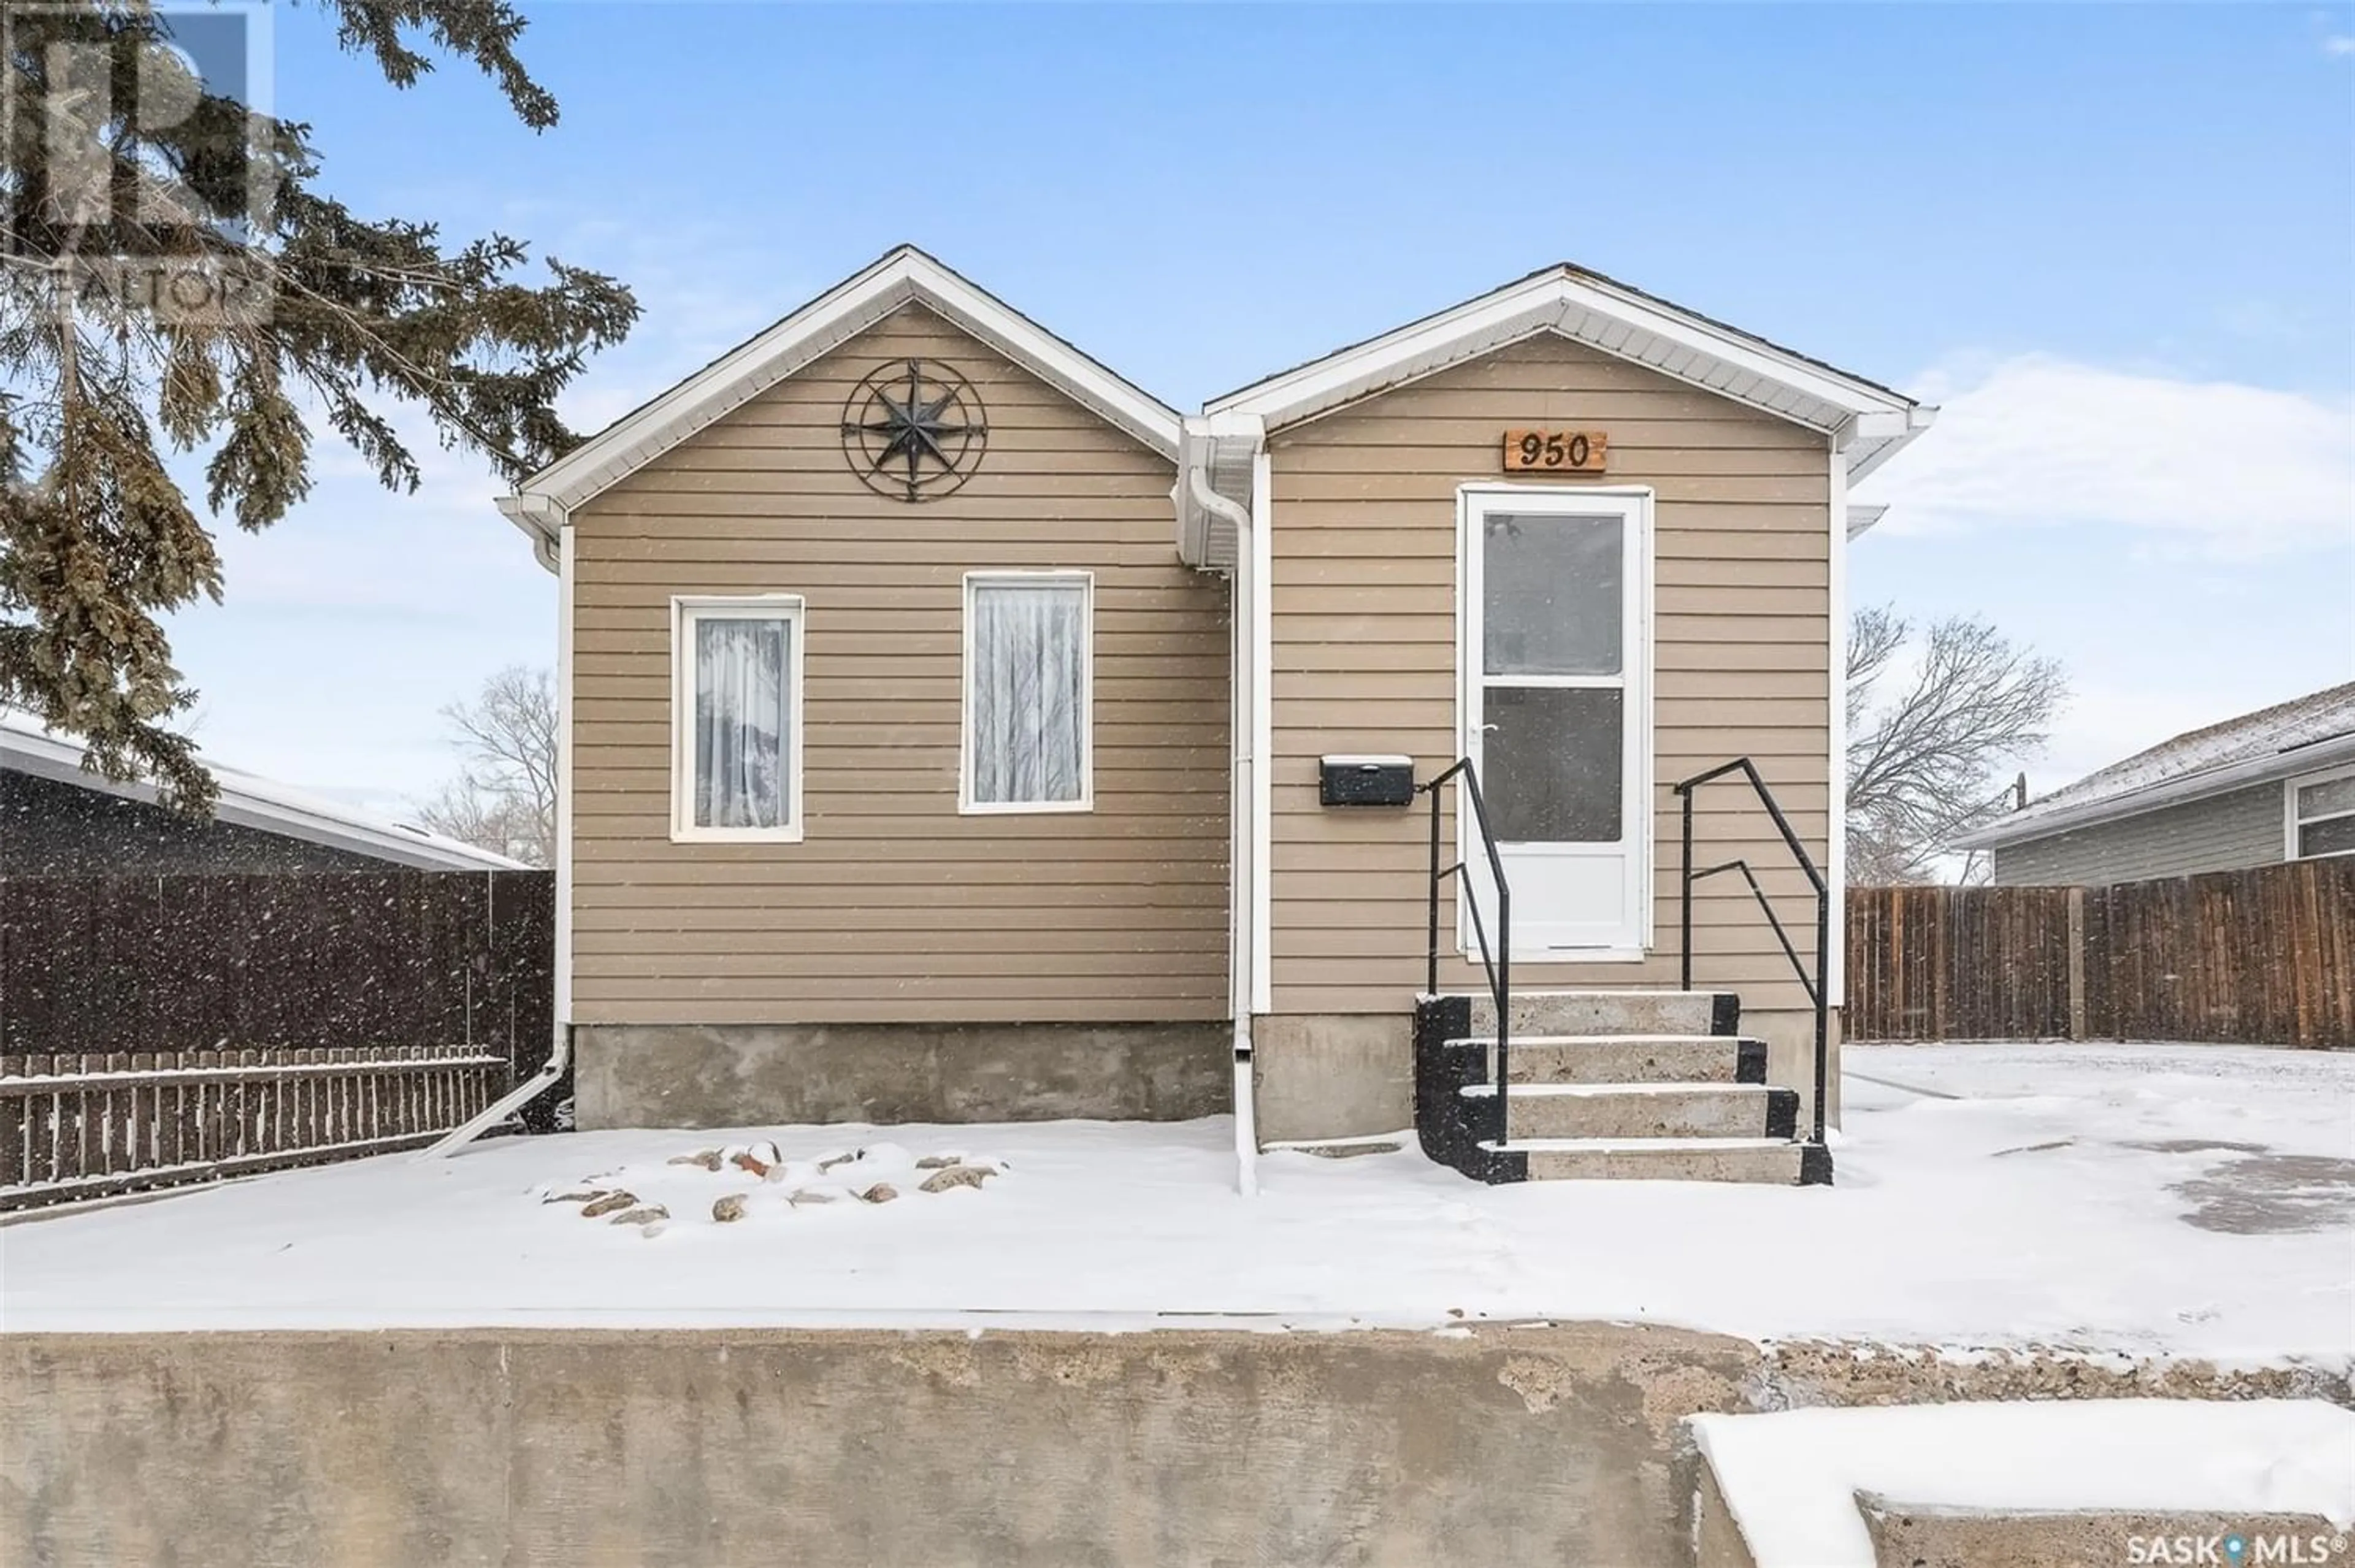 Home with unknown exterior material for 950 Caribou STREET W, Moose Jaw Saskatchewan S6H2L5